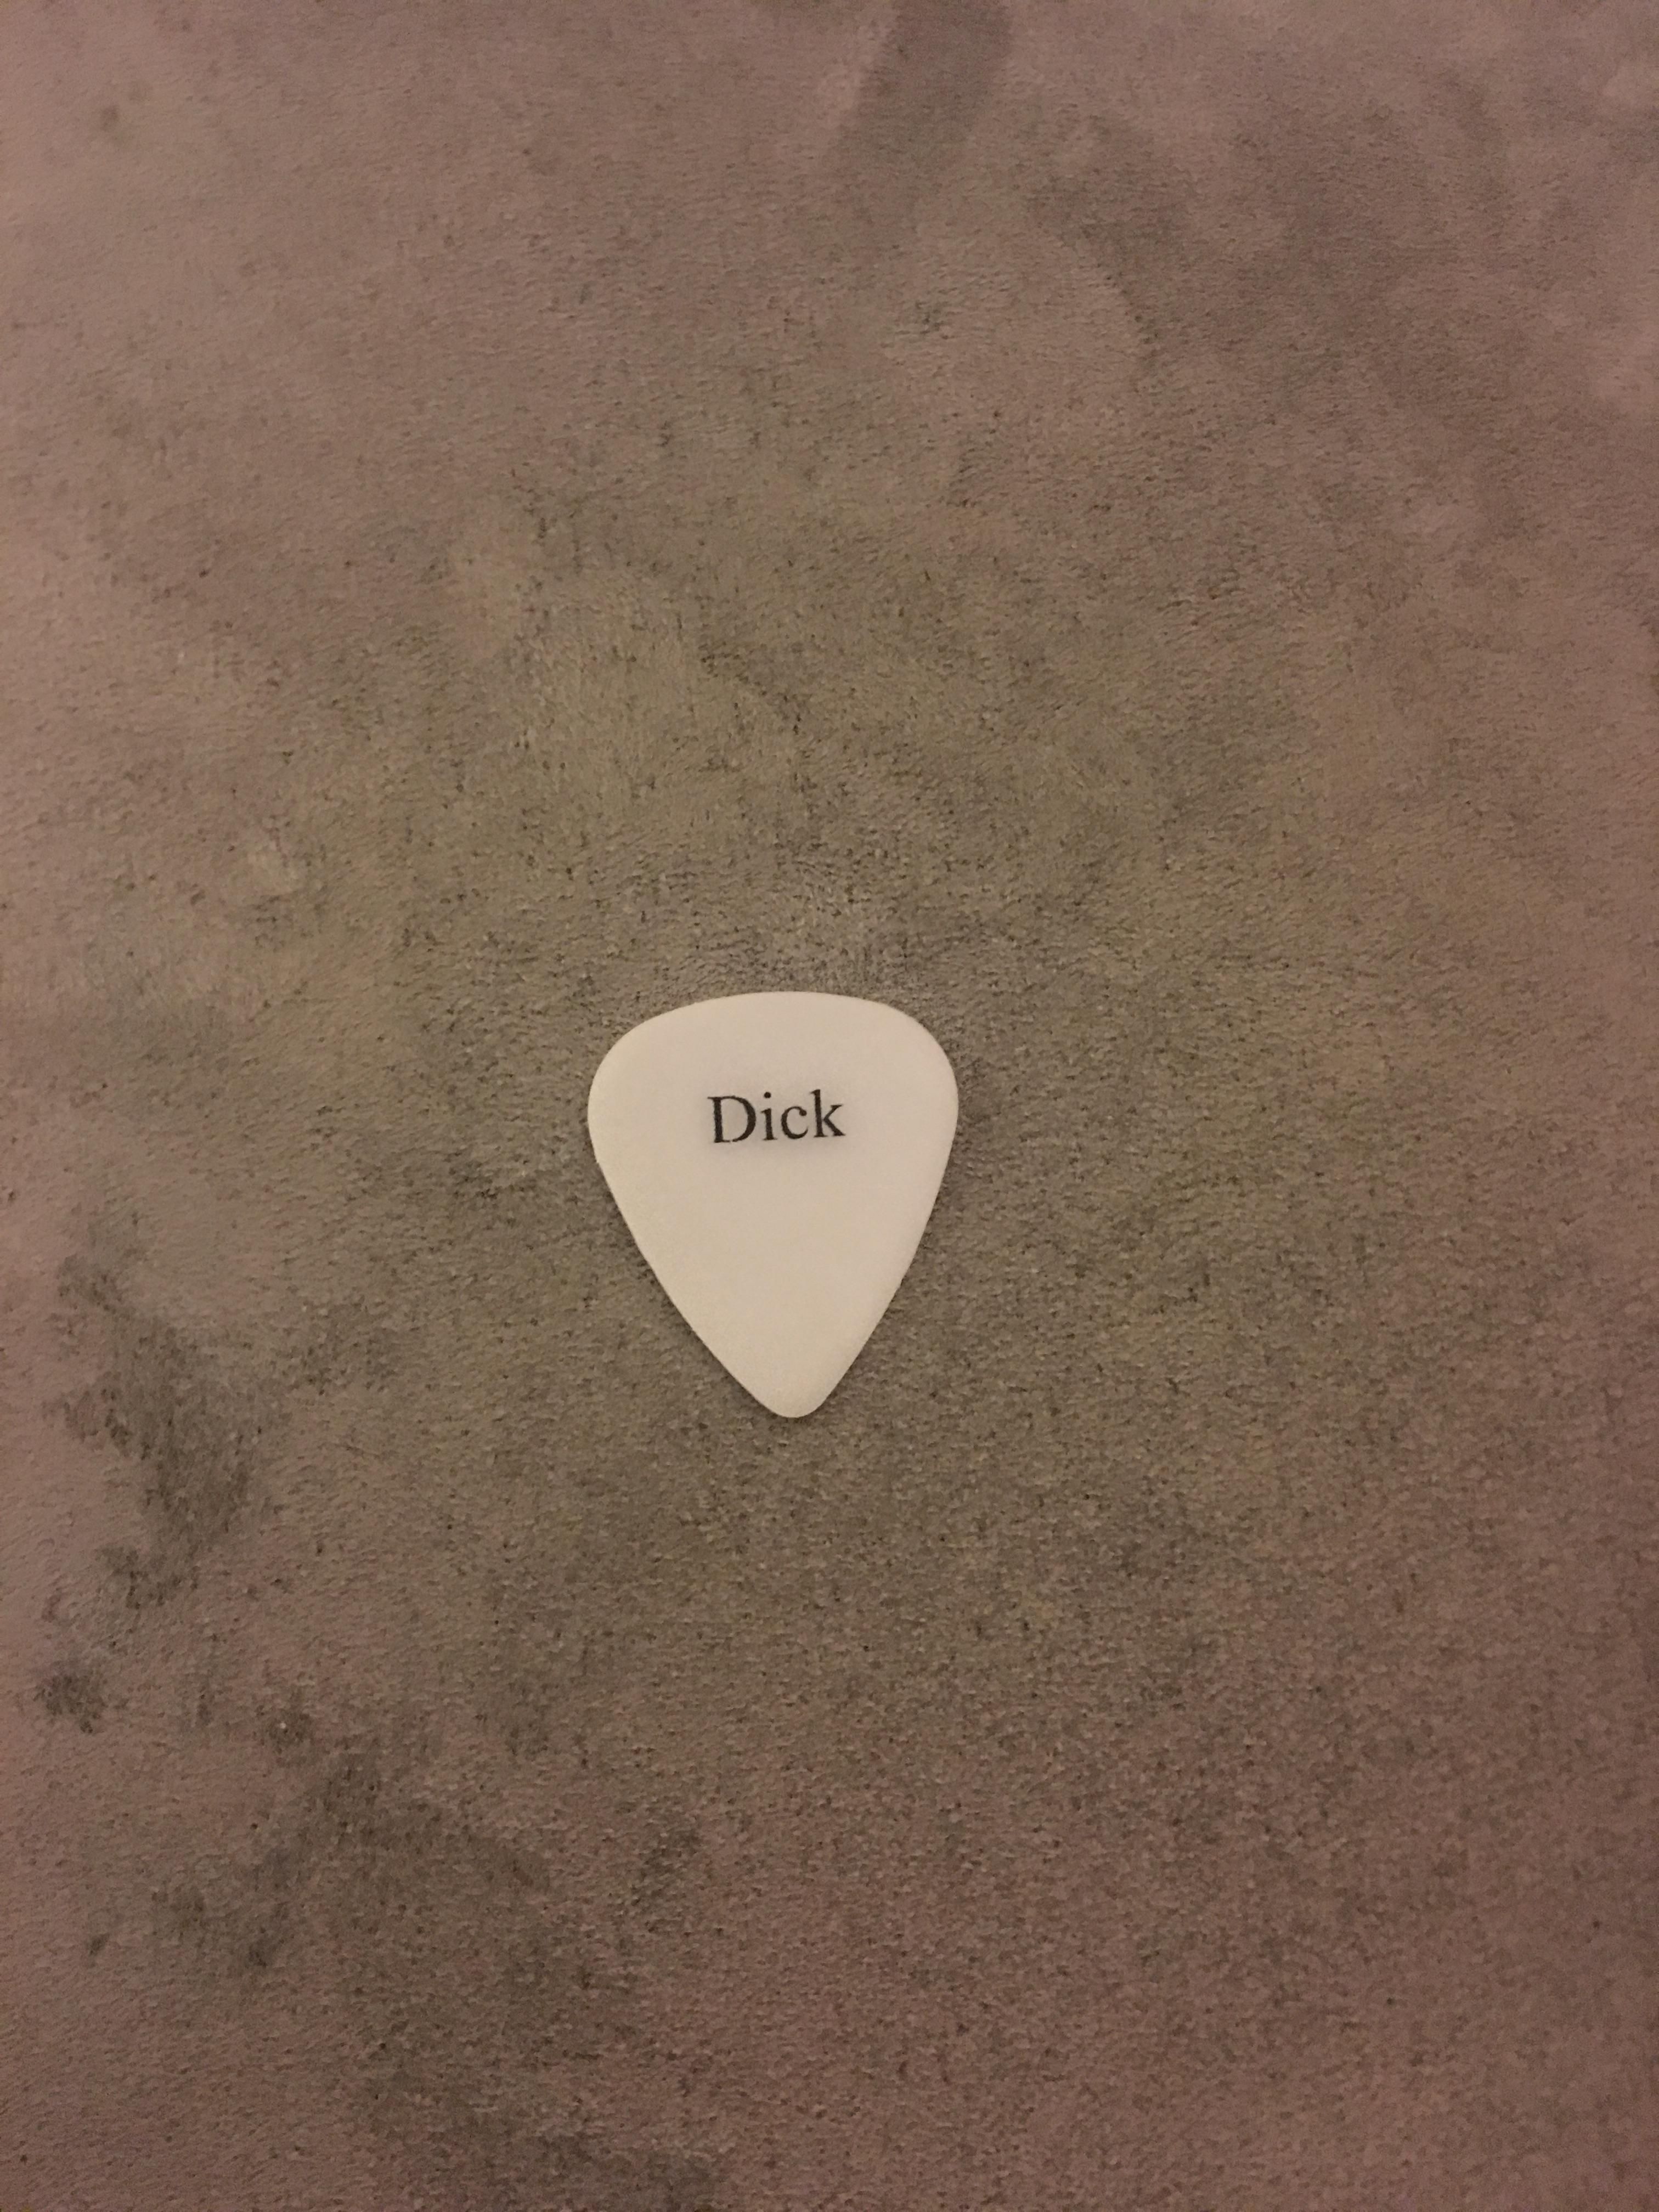 My friends dad gives out dick picks to anyone that wants them